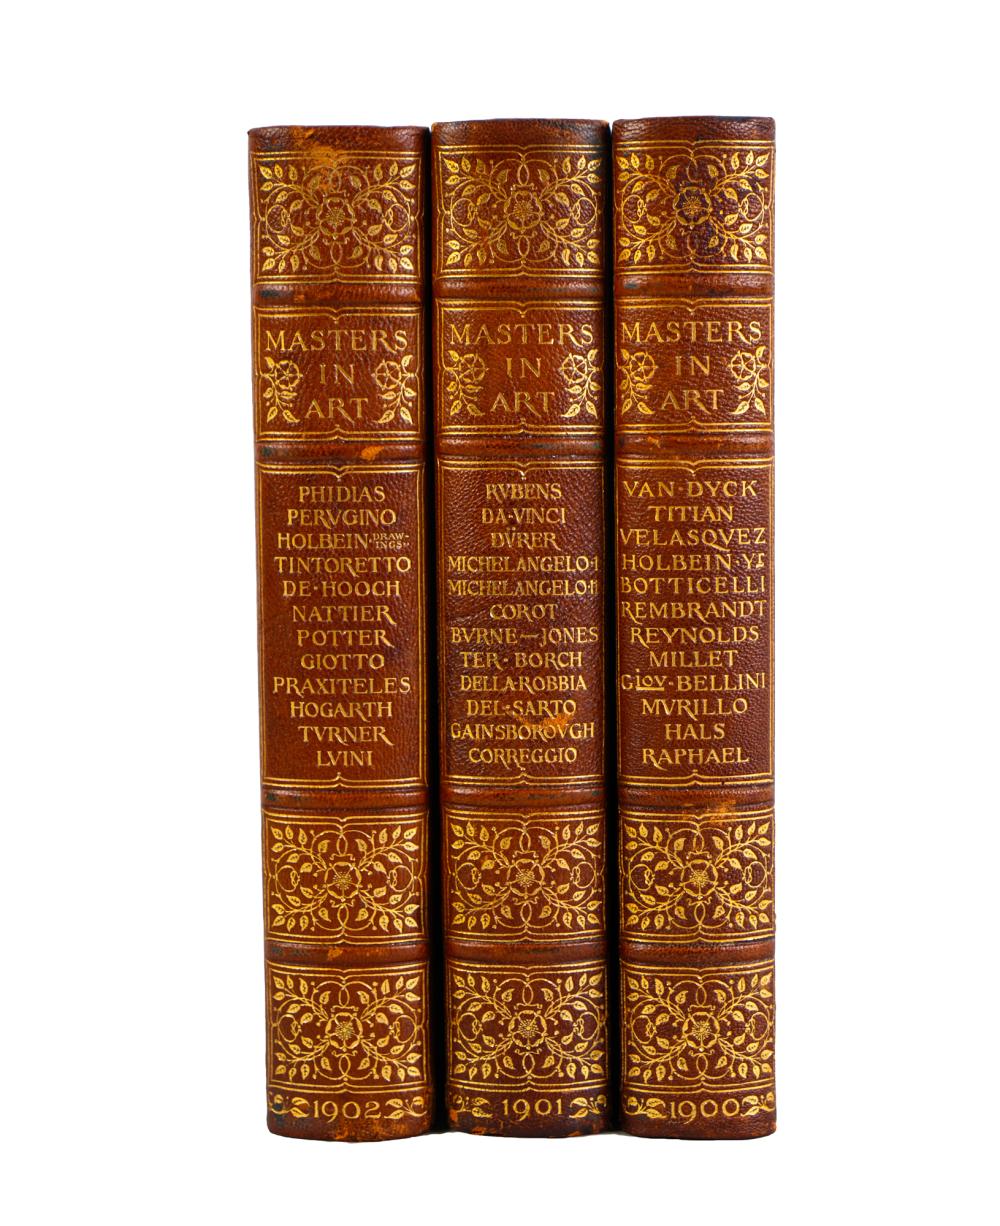 THREE VOLUMES: MASTERS IN ART"Masters